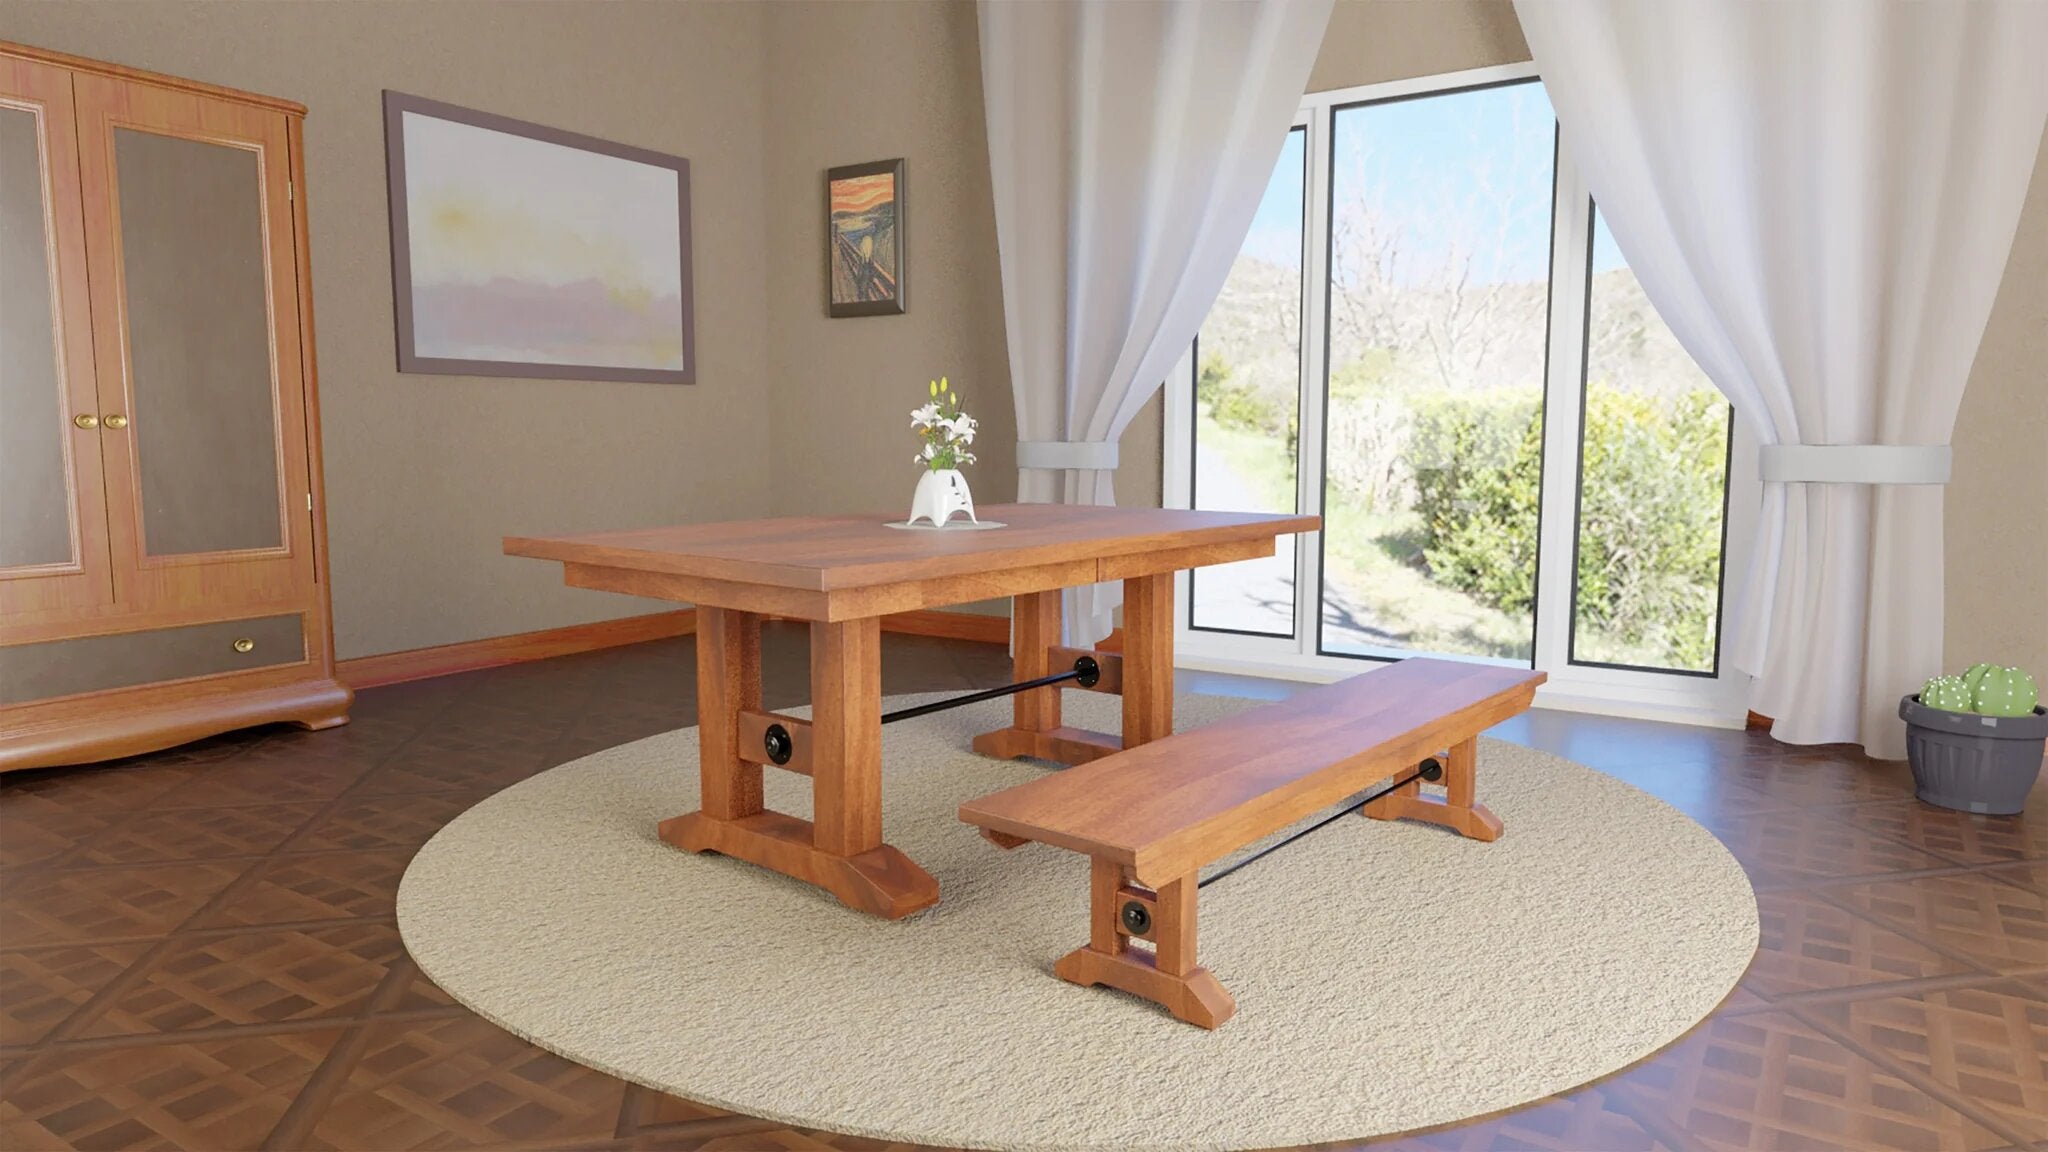 taylor double pedestal table with bench in room setting